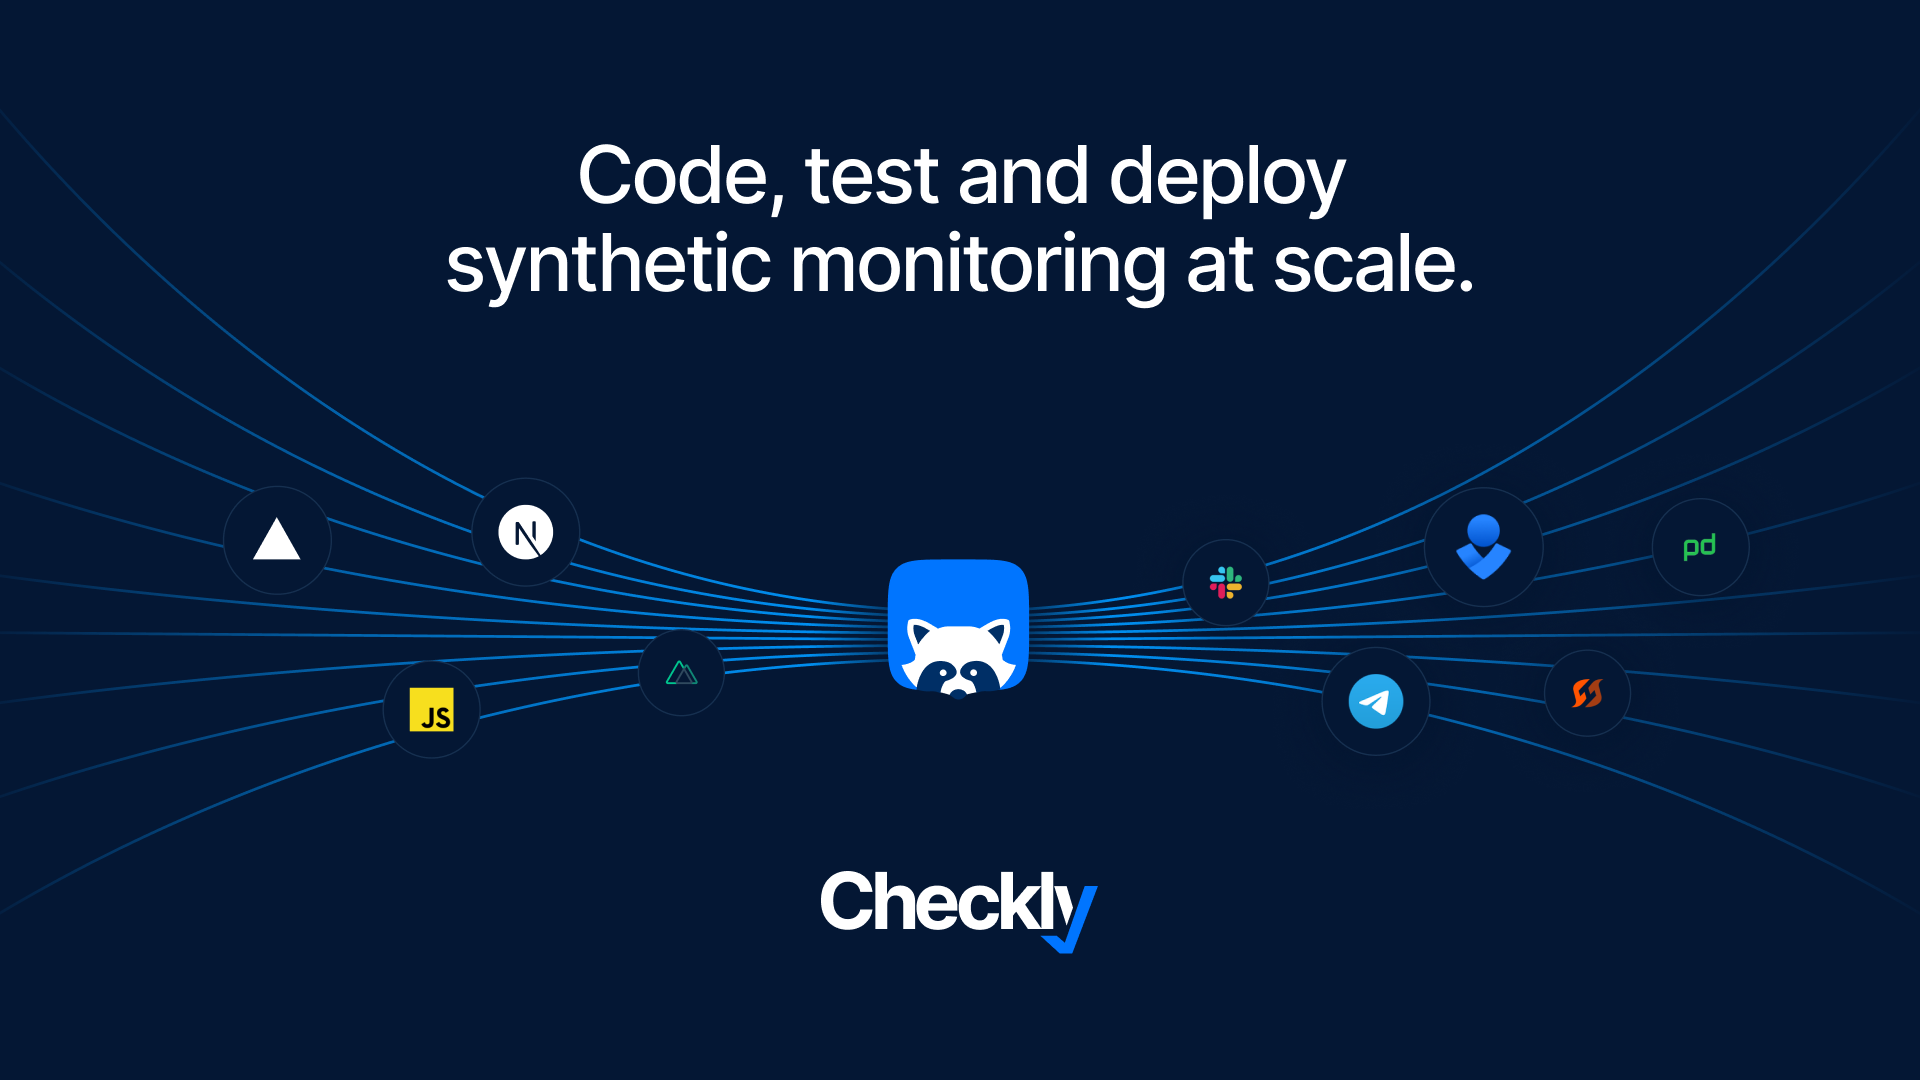 Checkly has announced the general availability of its new, innovative command line interface, the Checkly CLI.